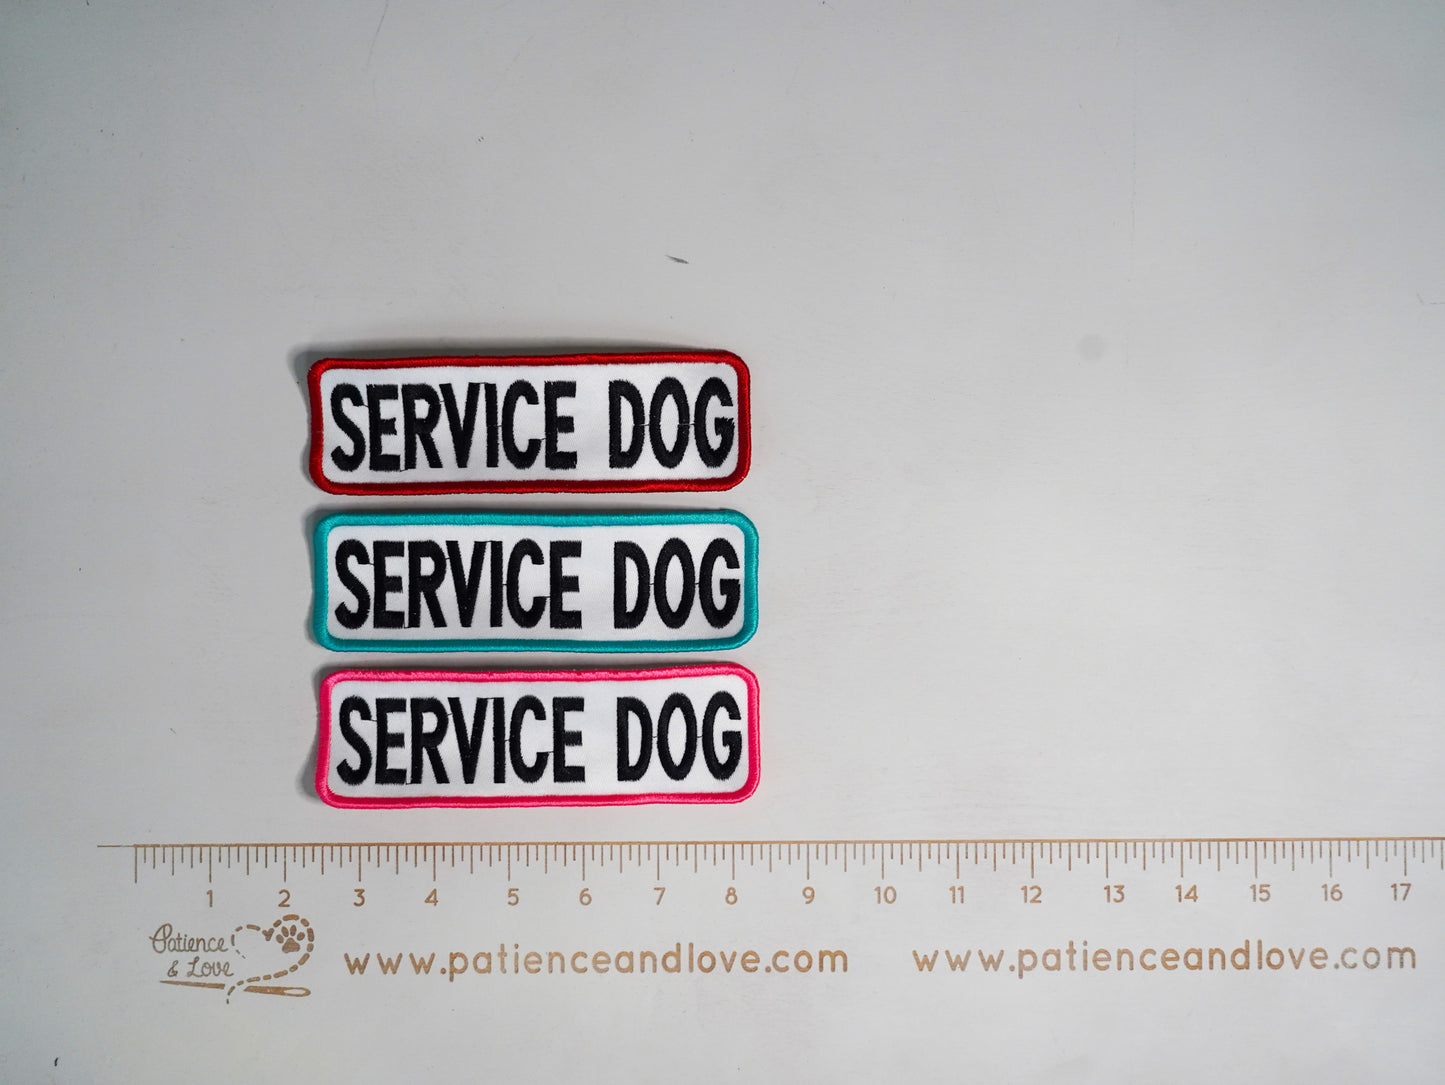 Premade/ Ready to ship patches - white fabric - Service Dog, Rectangular 6x2 patch